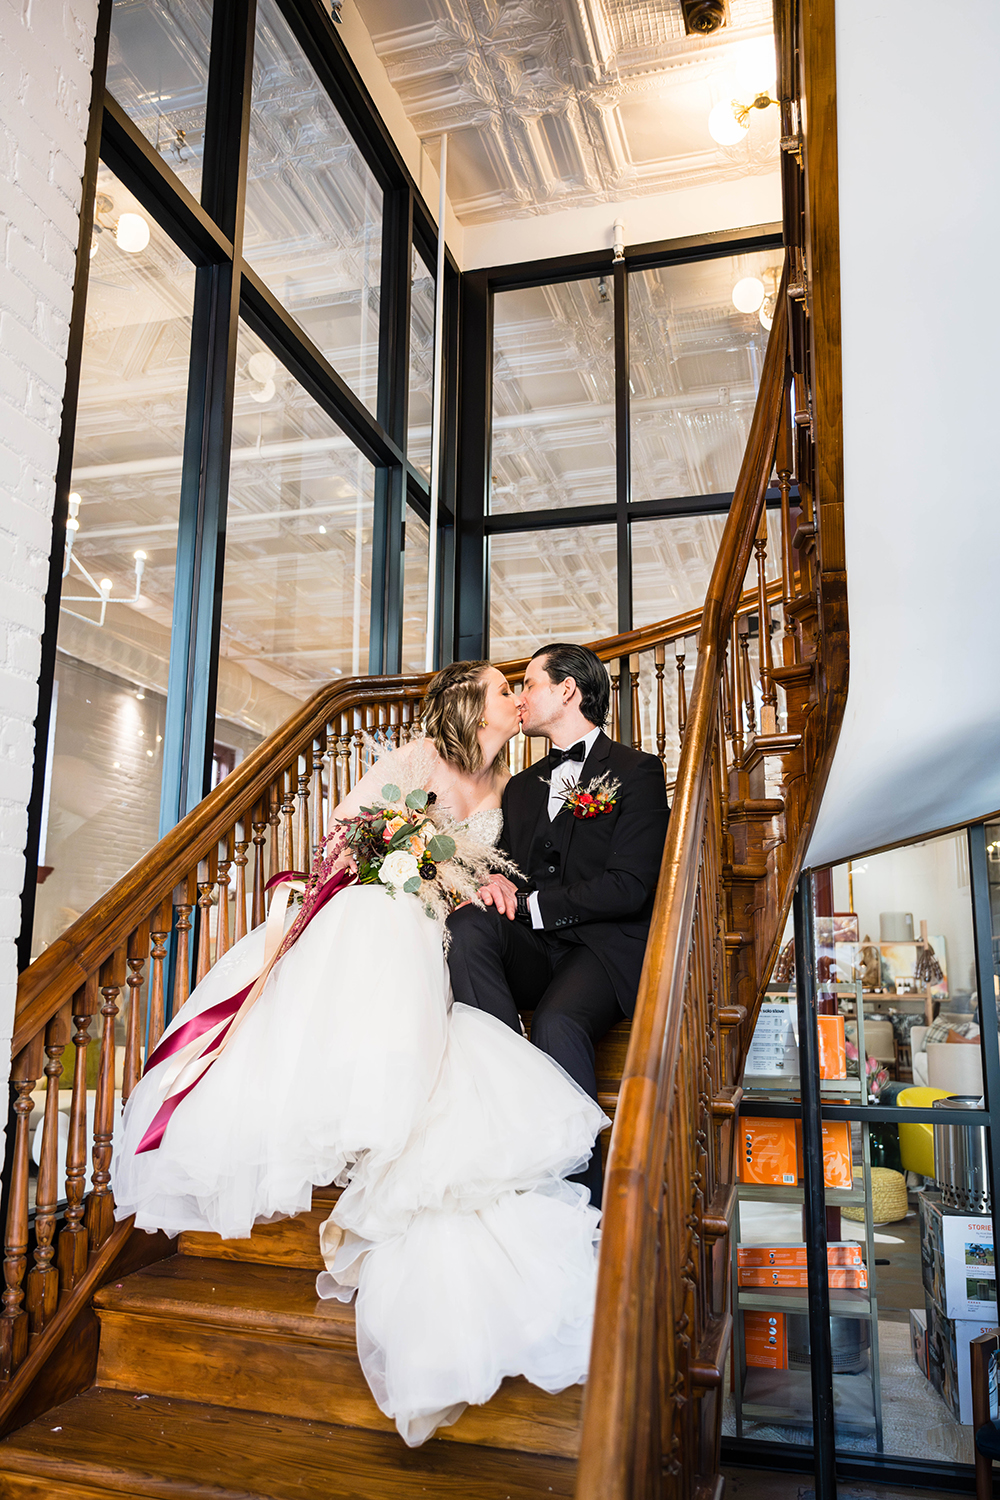 A couple on their elopement day kiss while sitting on an antique stairwell featured in the Fire Station One Hotel in Roanoke, Virginia.